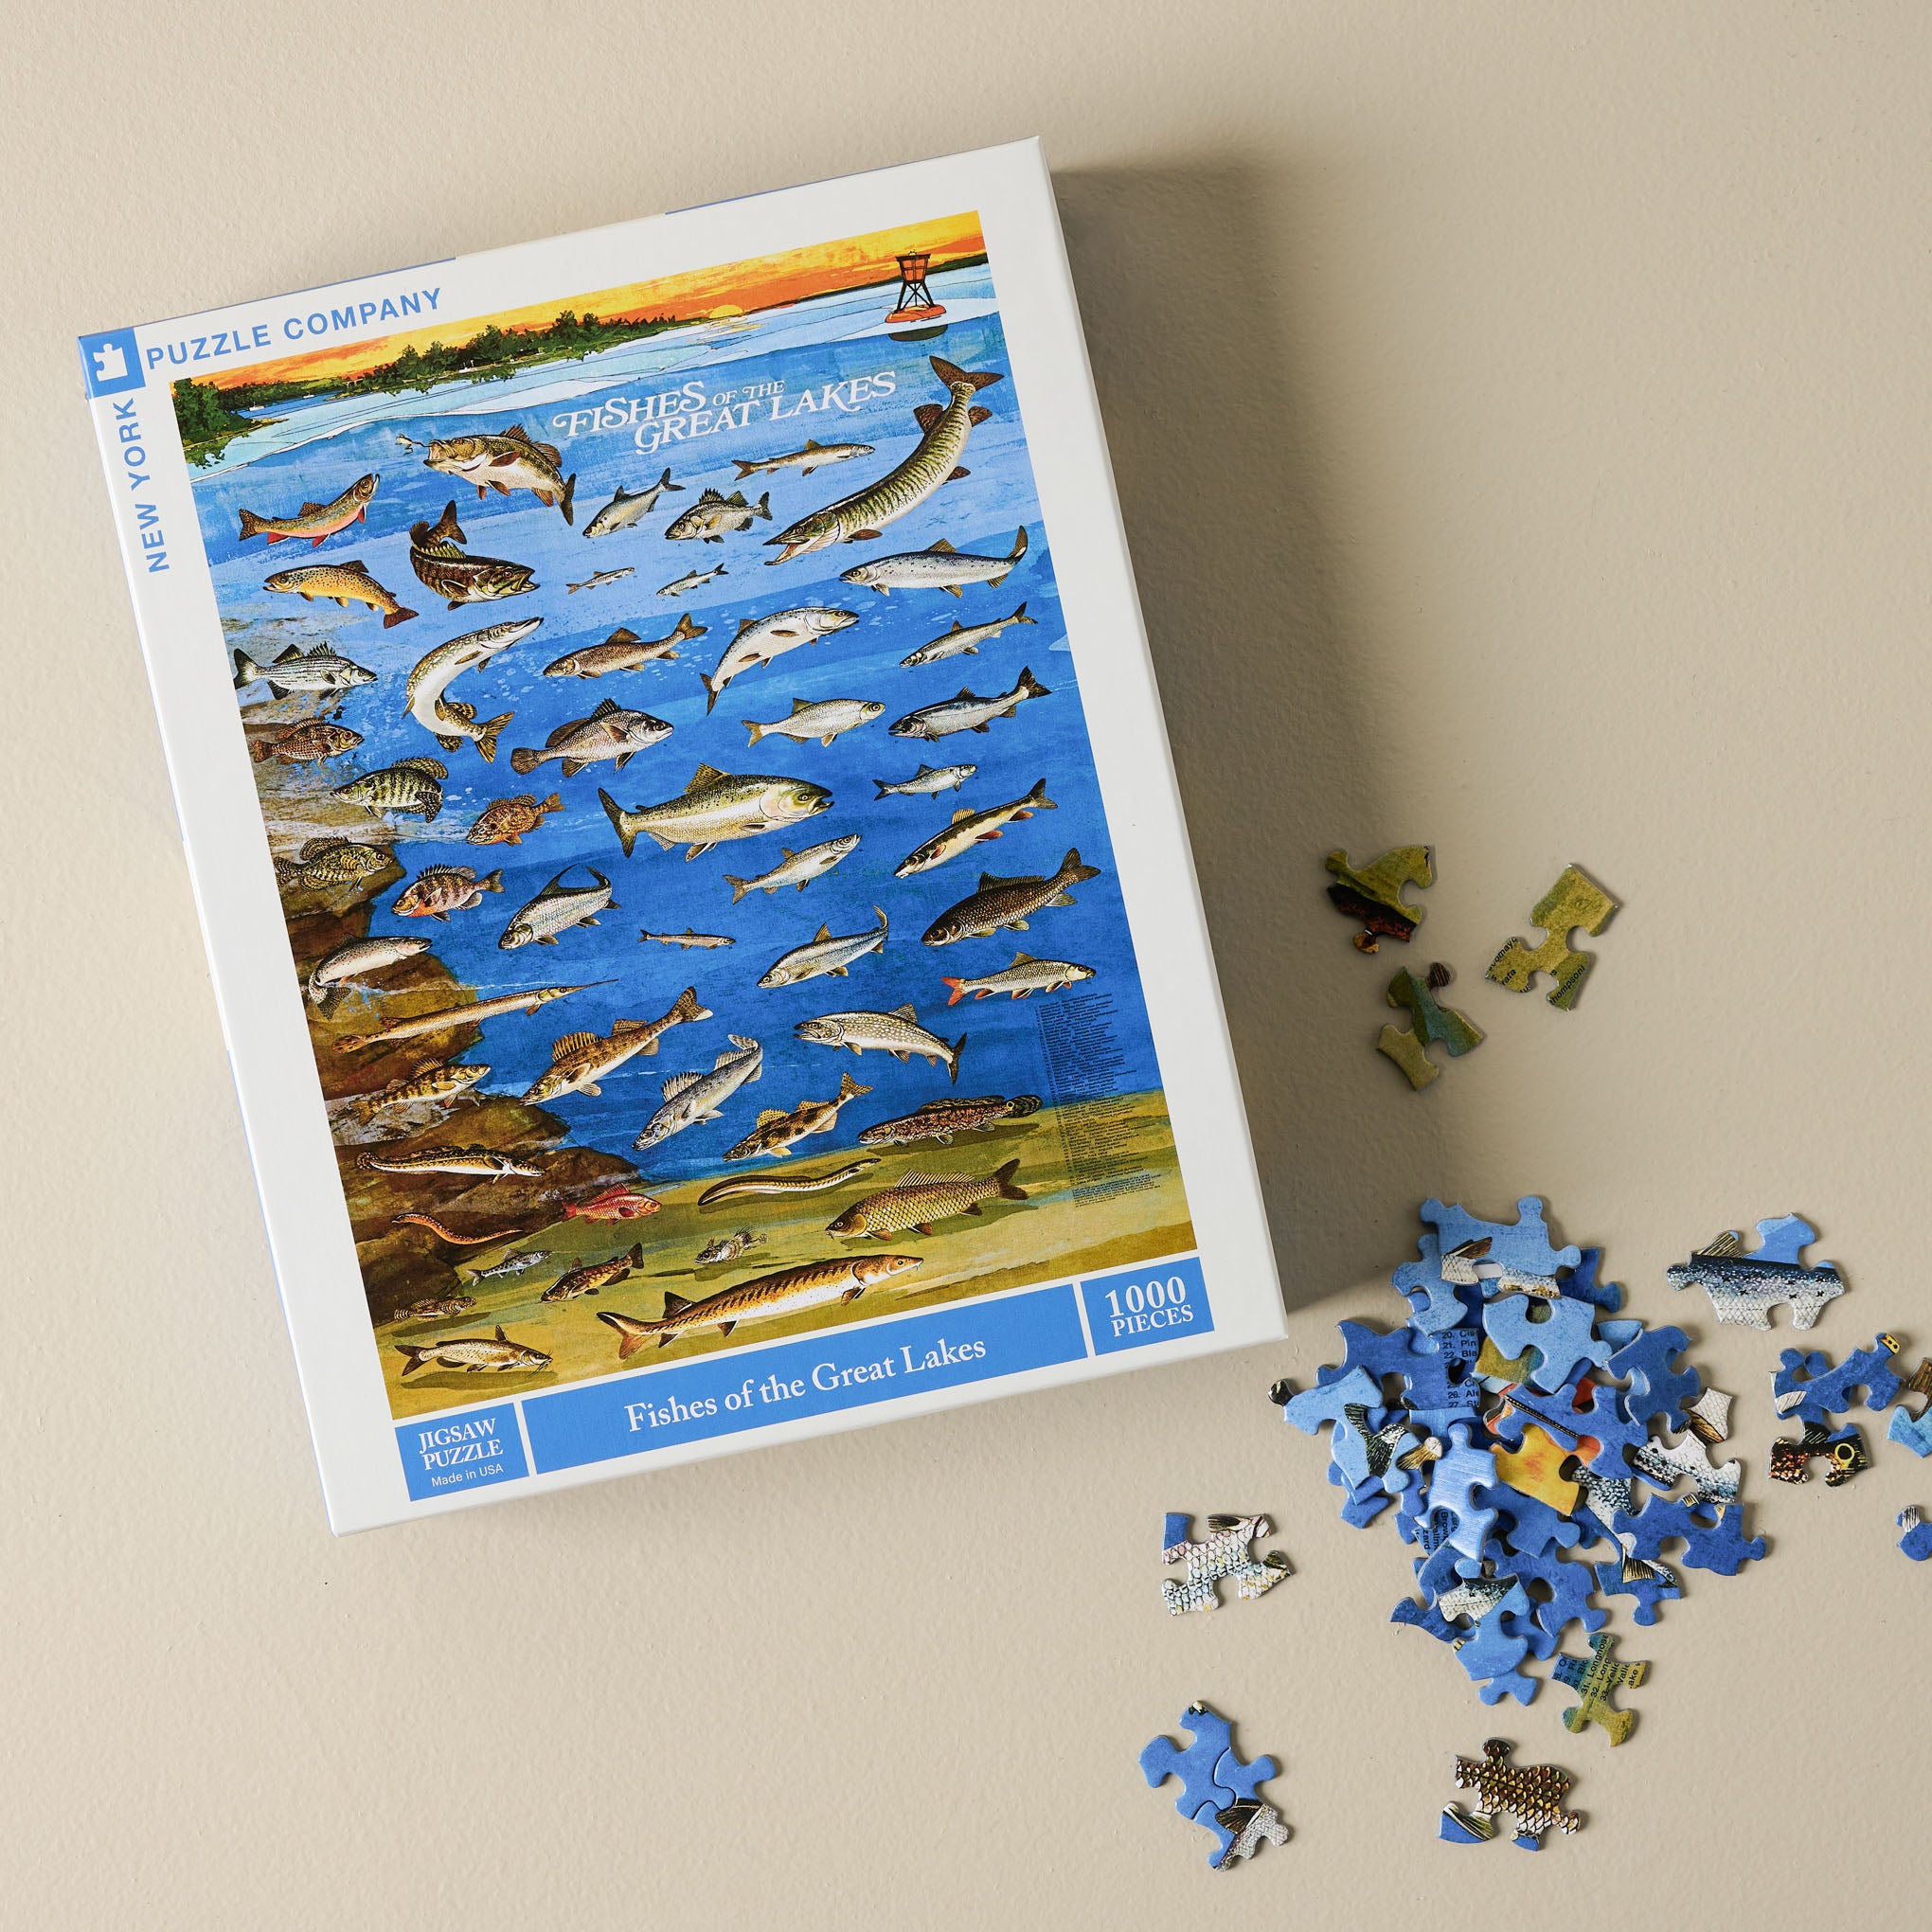 Fishes of the Great Lakes Puzzle $25.00